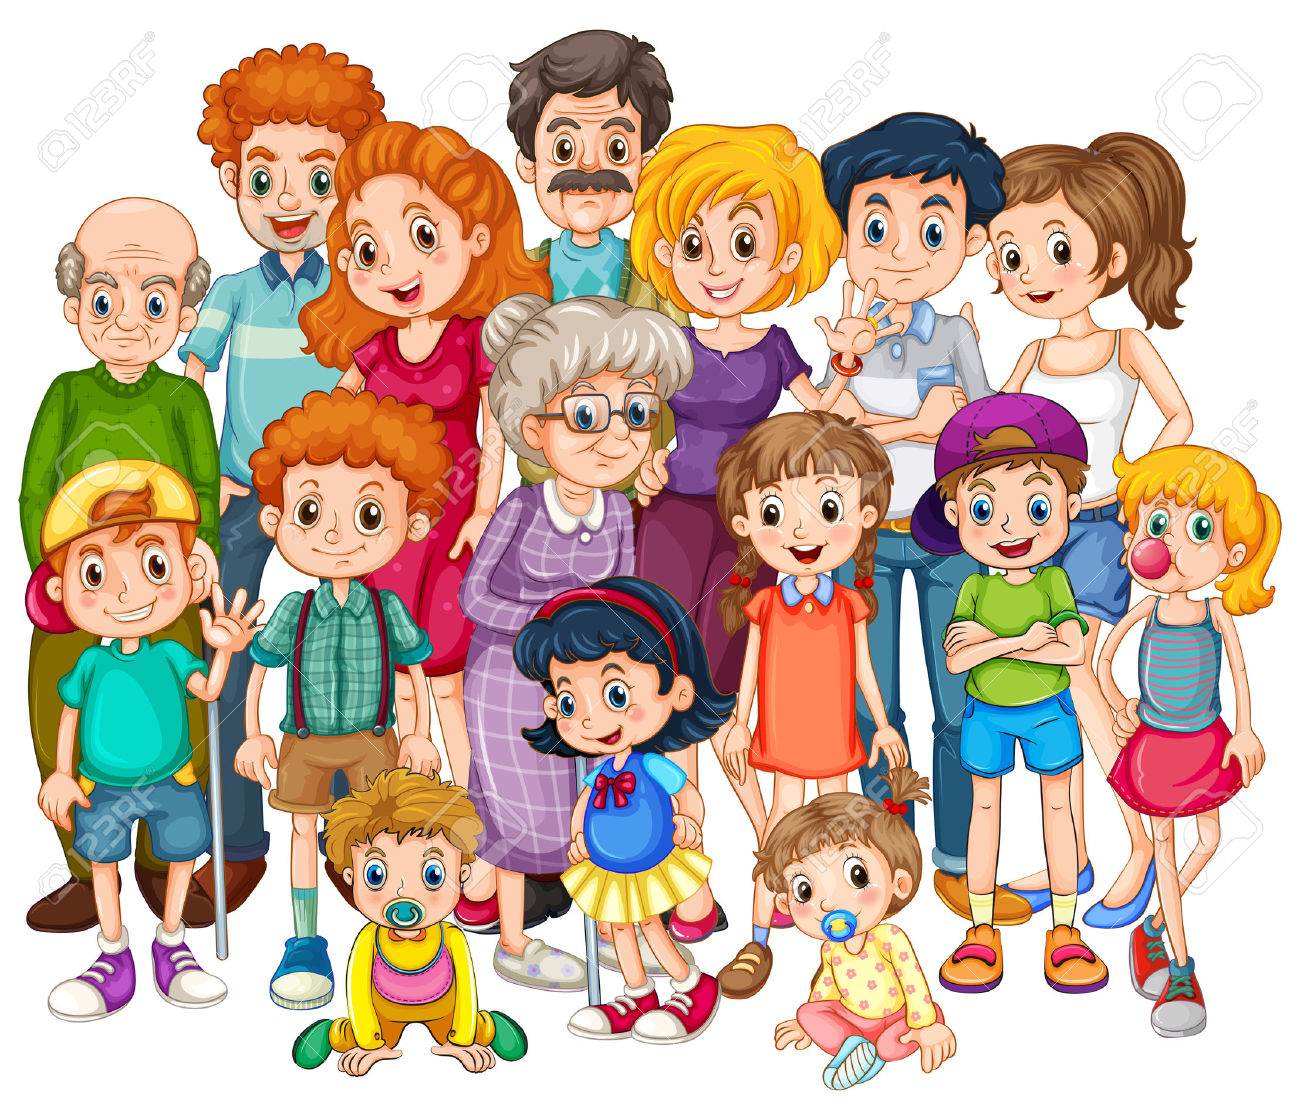 Family illustrations and clip